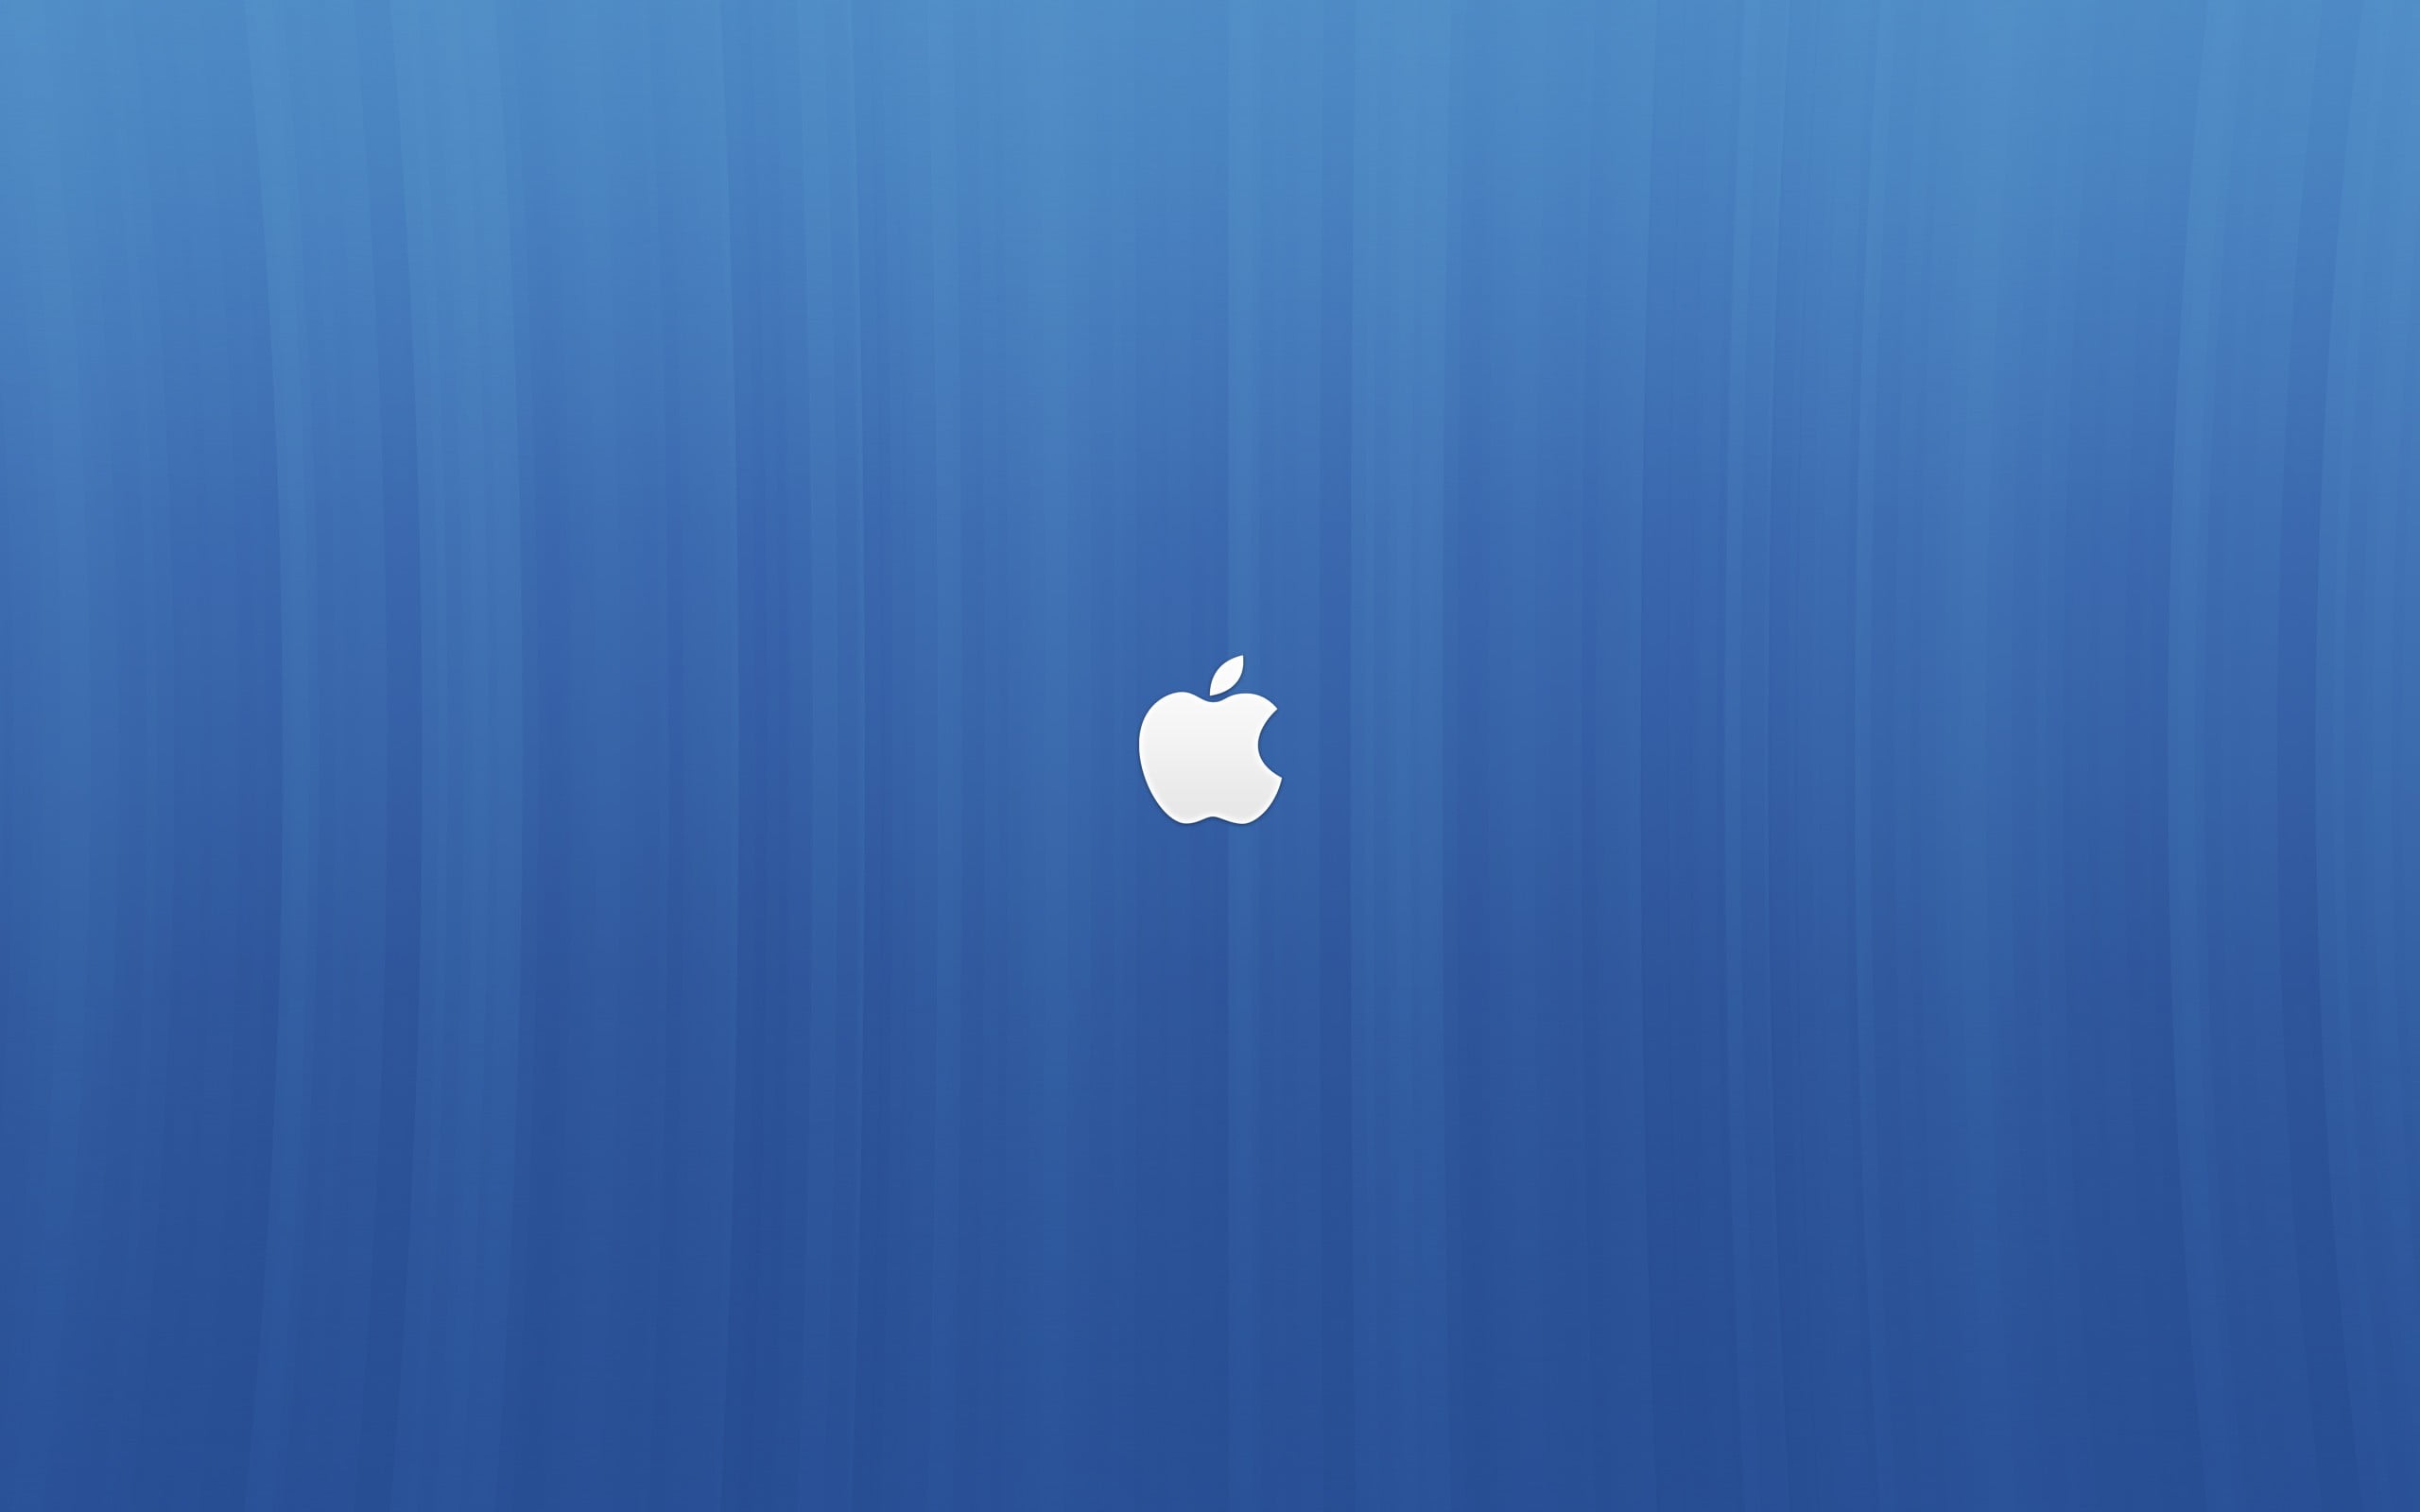 blue and white wooden wardrobe, Apple Inc.